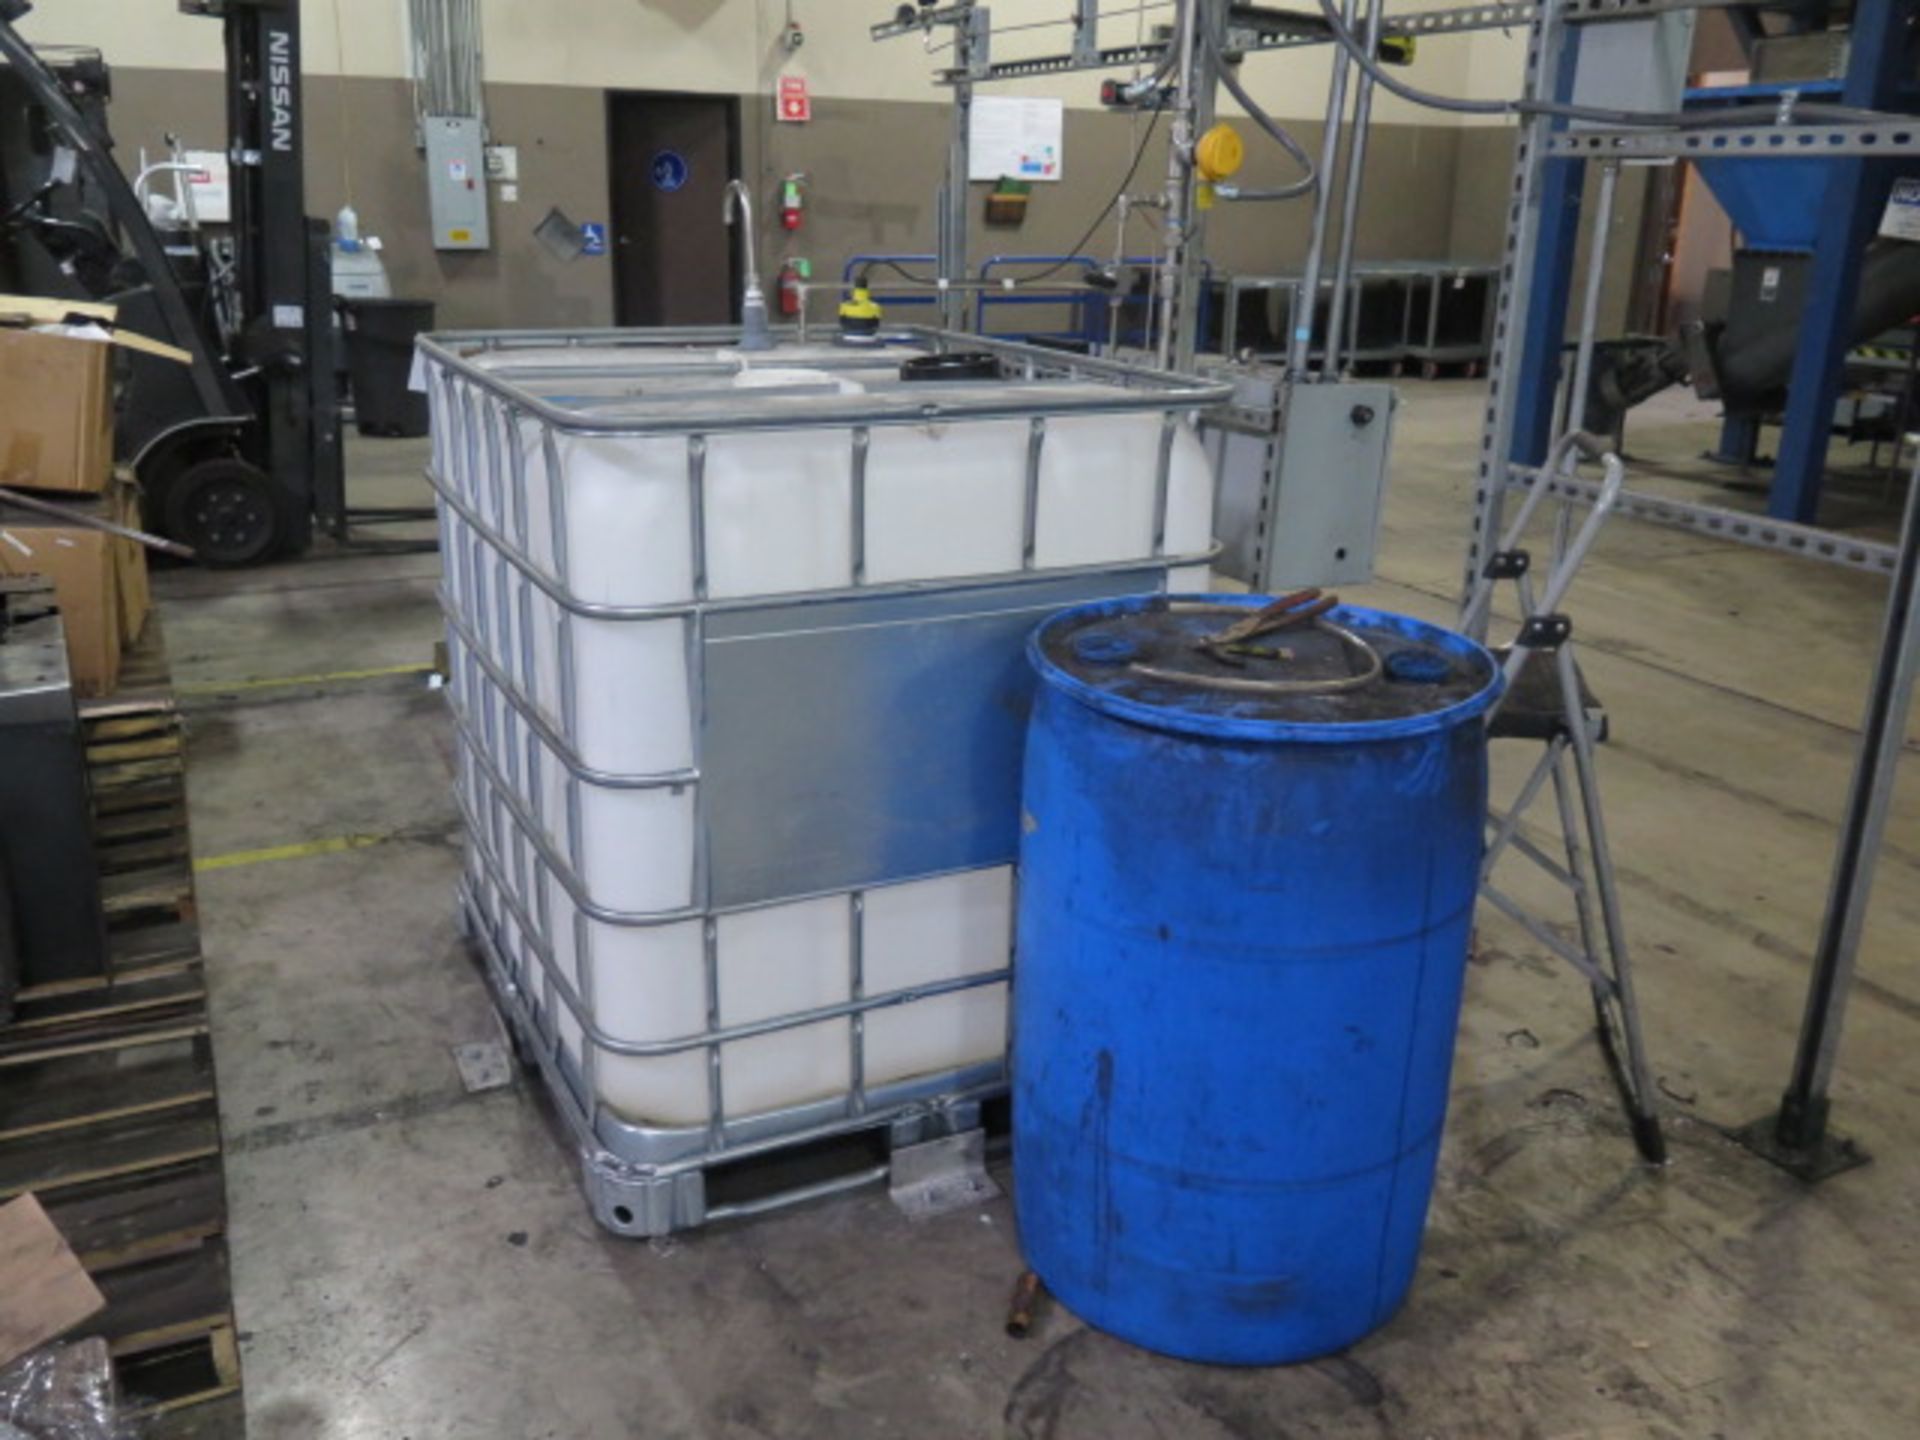 Wet Biochar Line Consisting of : 4000 Lb Cap Bag Loading System SOLD AS IS WITH NO WARRANTY - Image 16 of 16